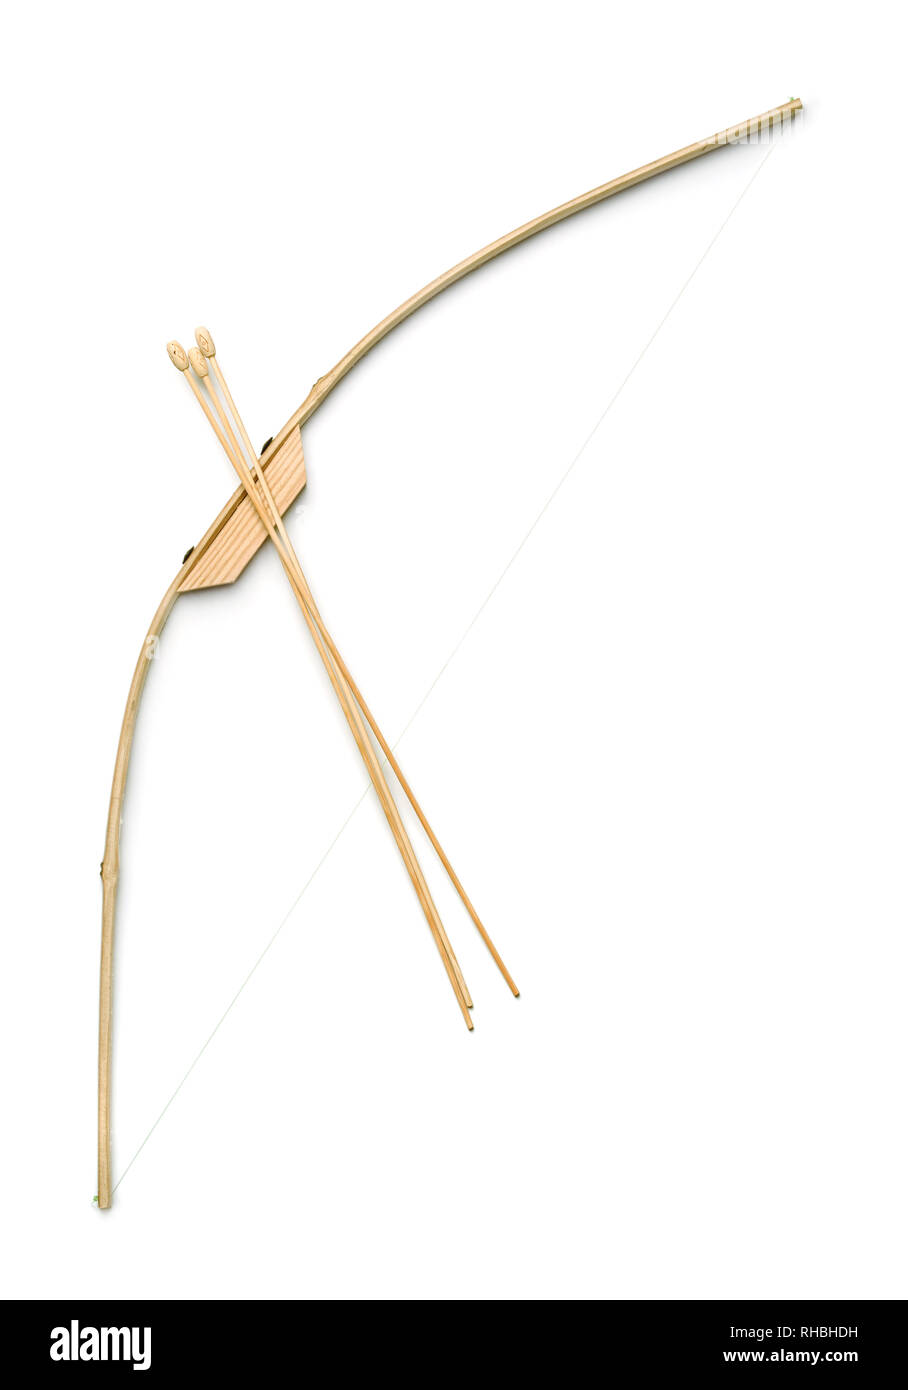 Toy wooden bow and arrows isolated on white Stock Photo